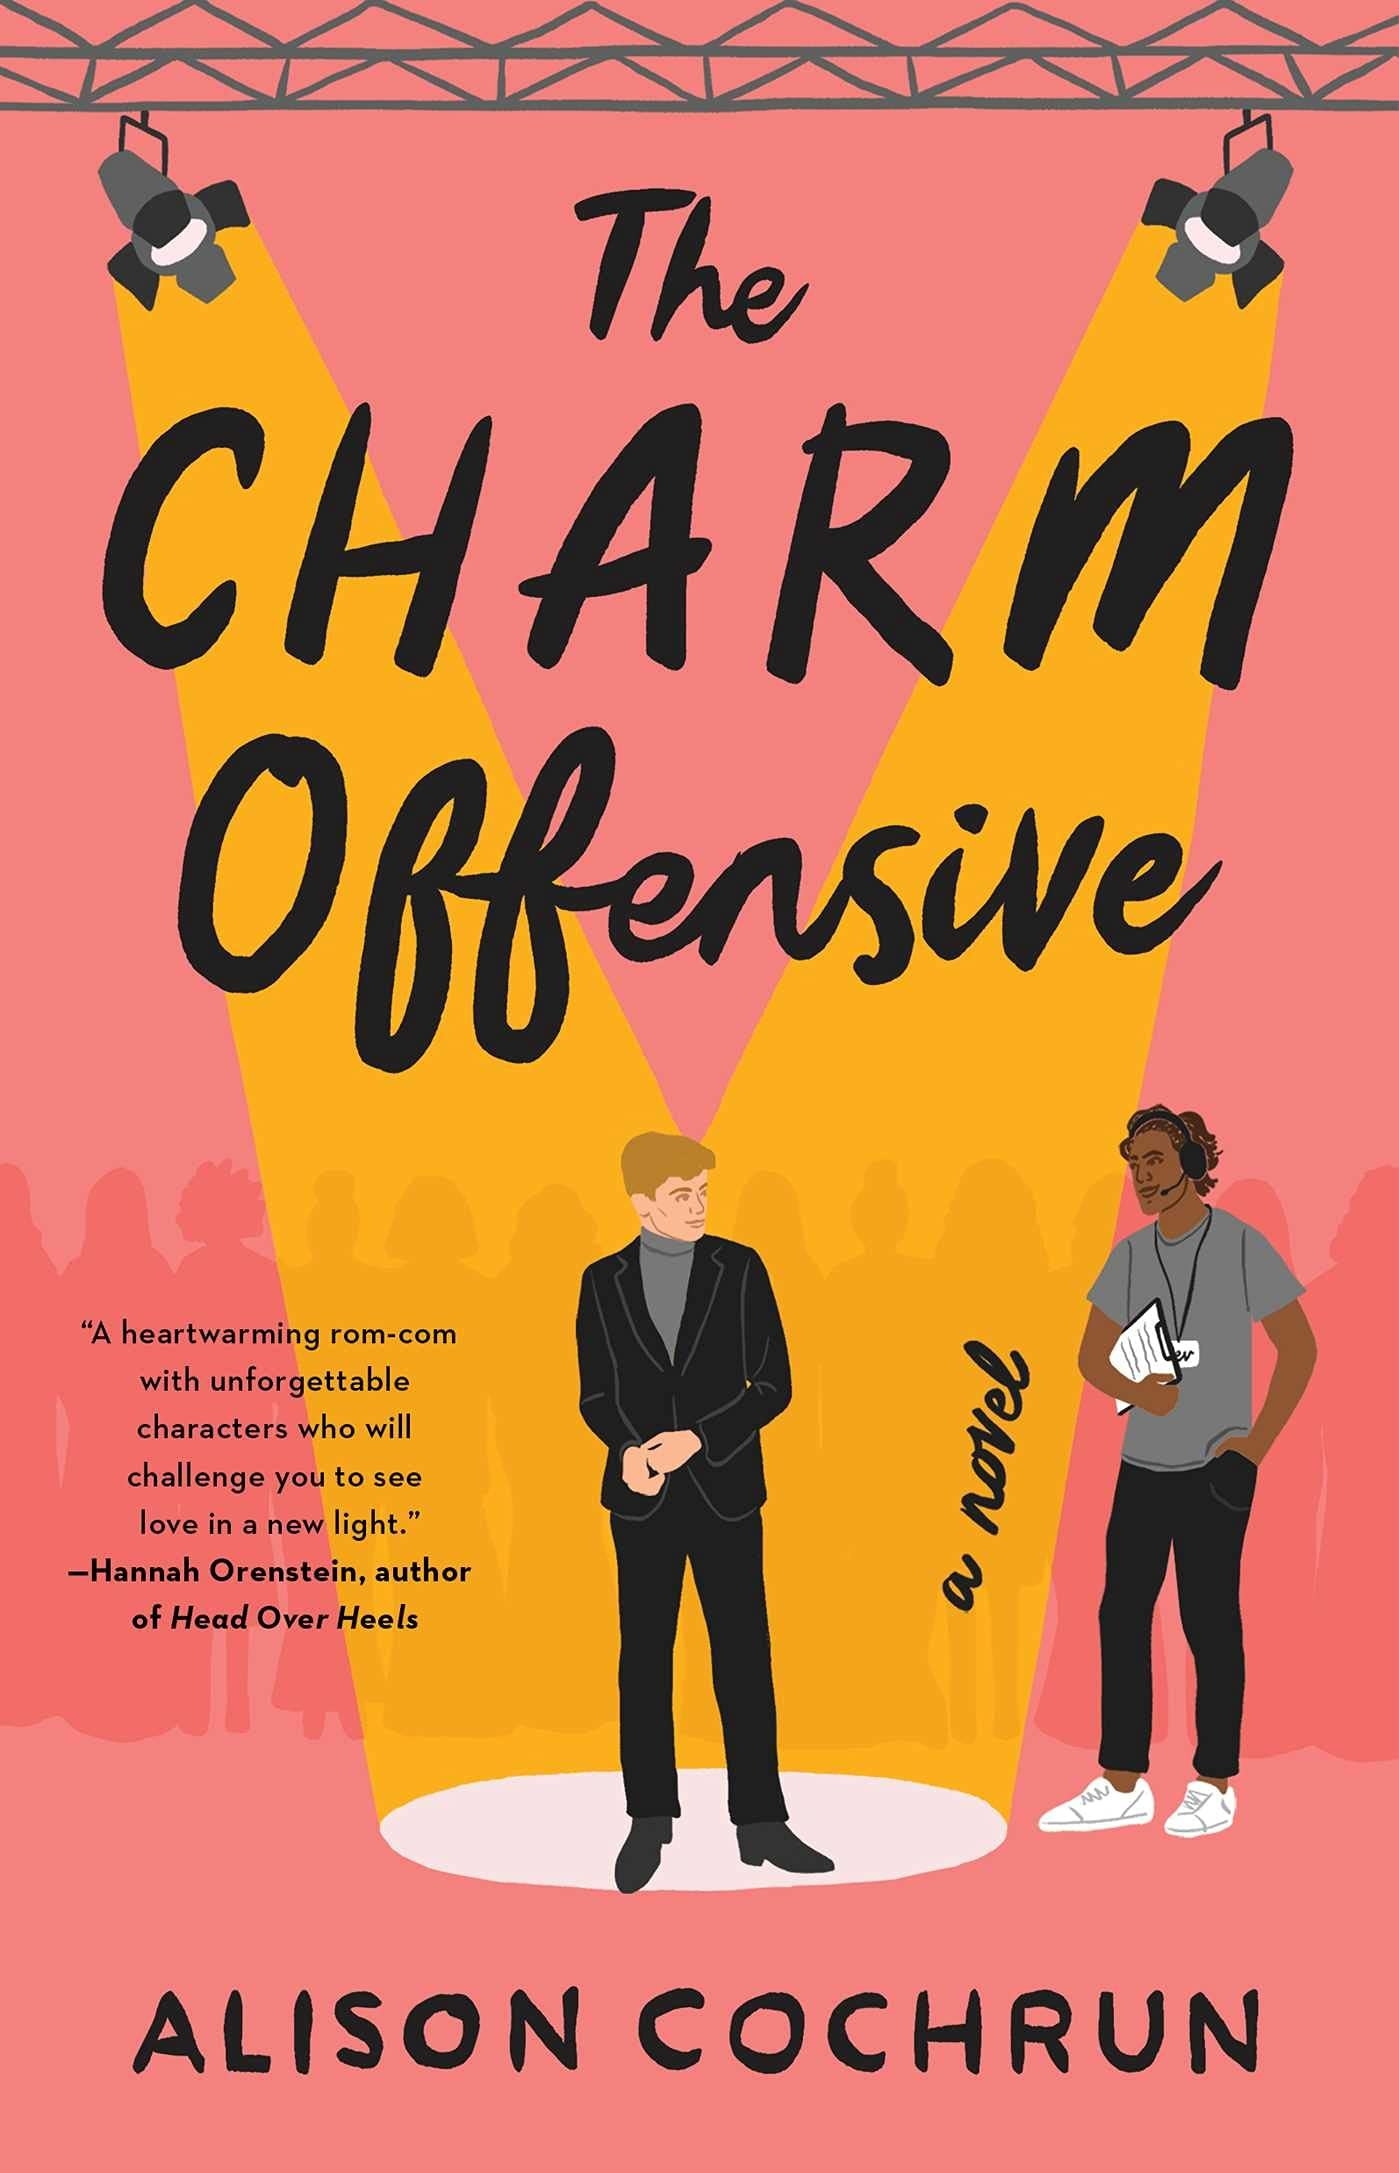 The Charm Offensive book cover. Book by Alison Cochrun